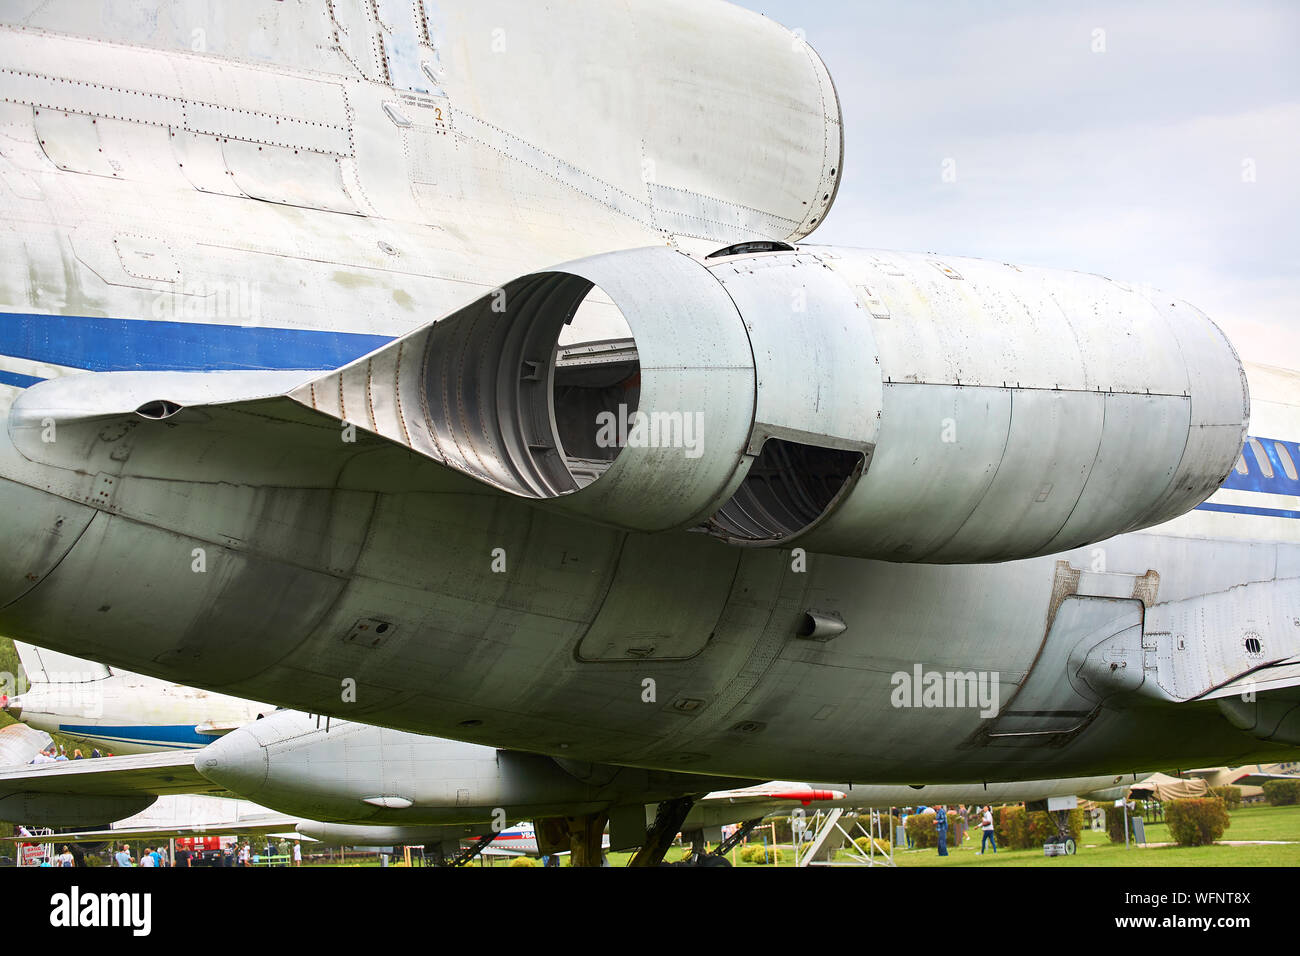 Elements of the old military plane close-up. Stock Photo